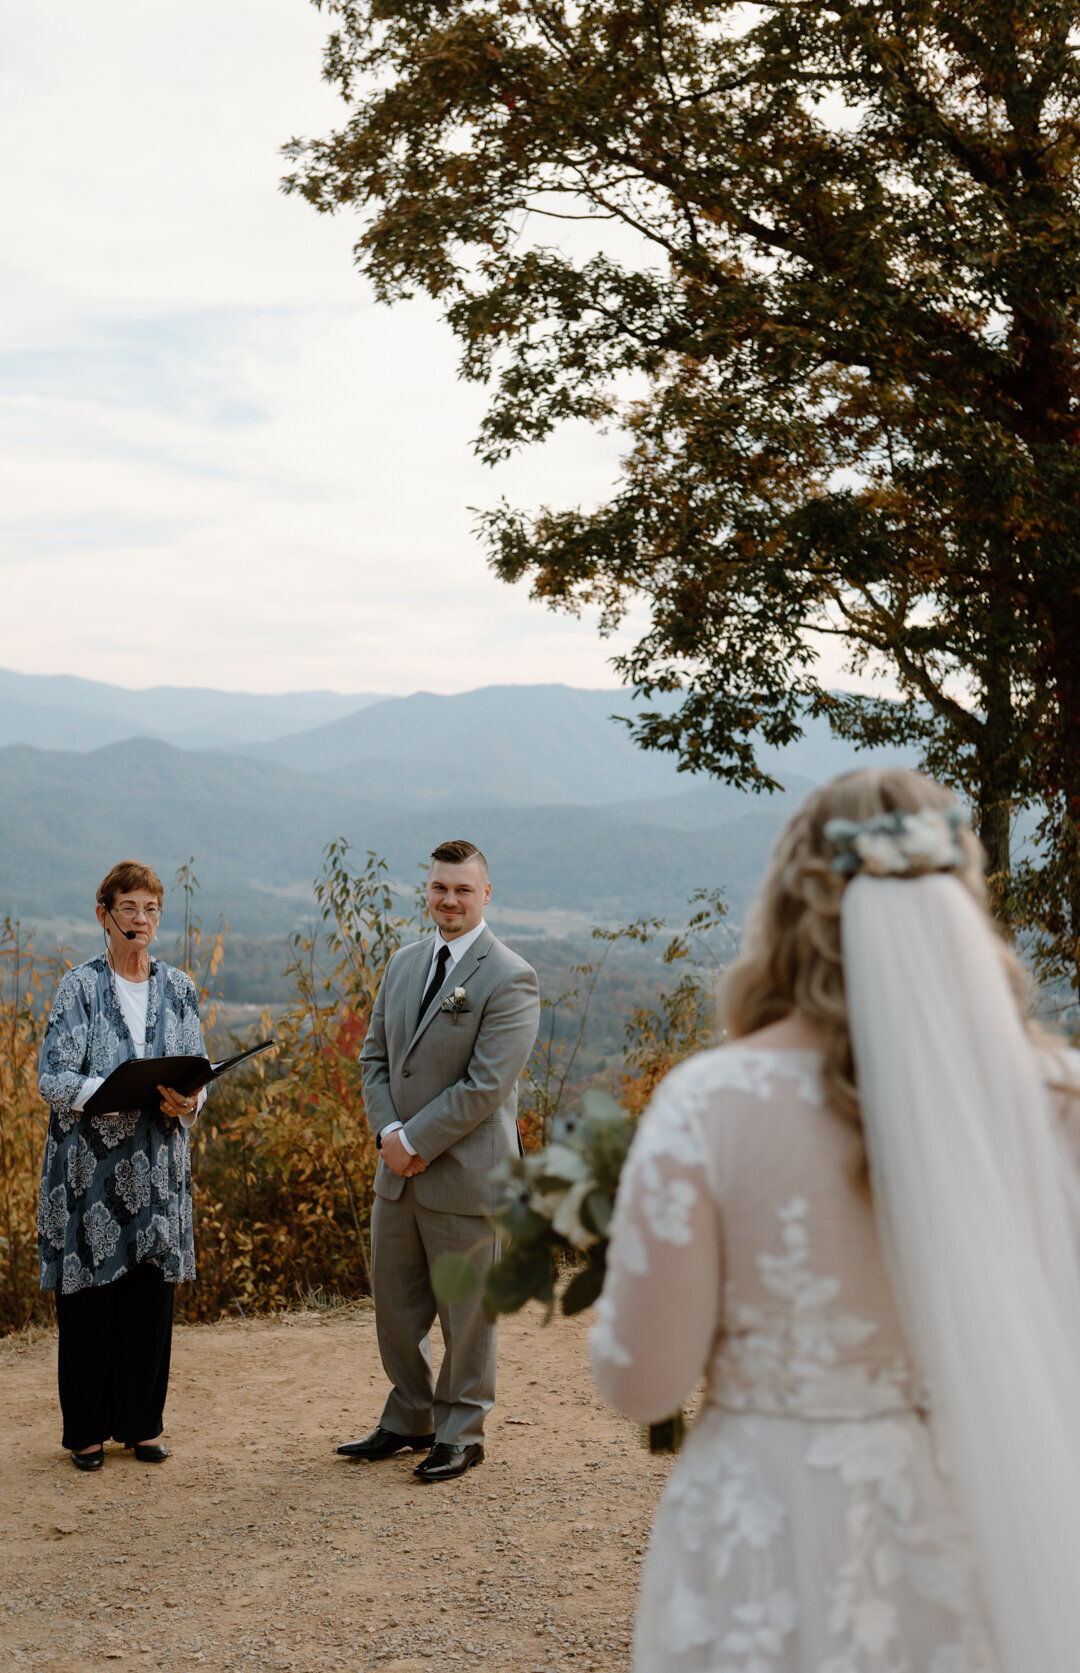 Groom's reaction to bride walking down the aisle at a mountain overlook elopement in Tennessee.